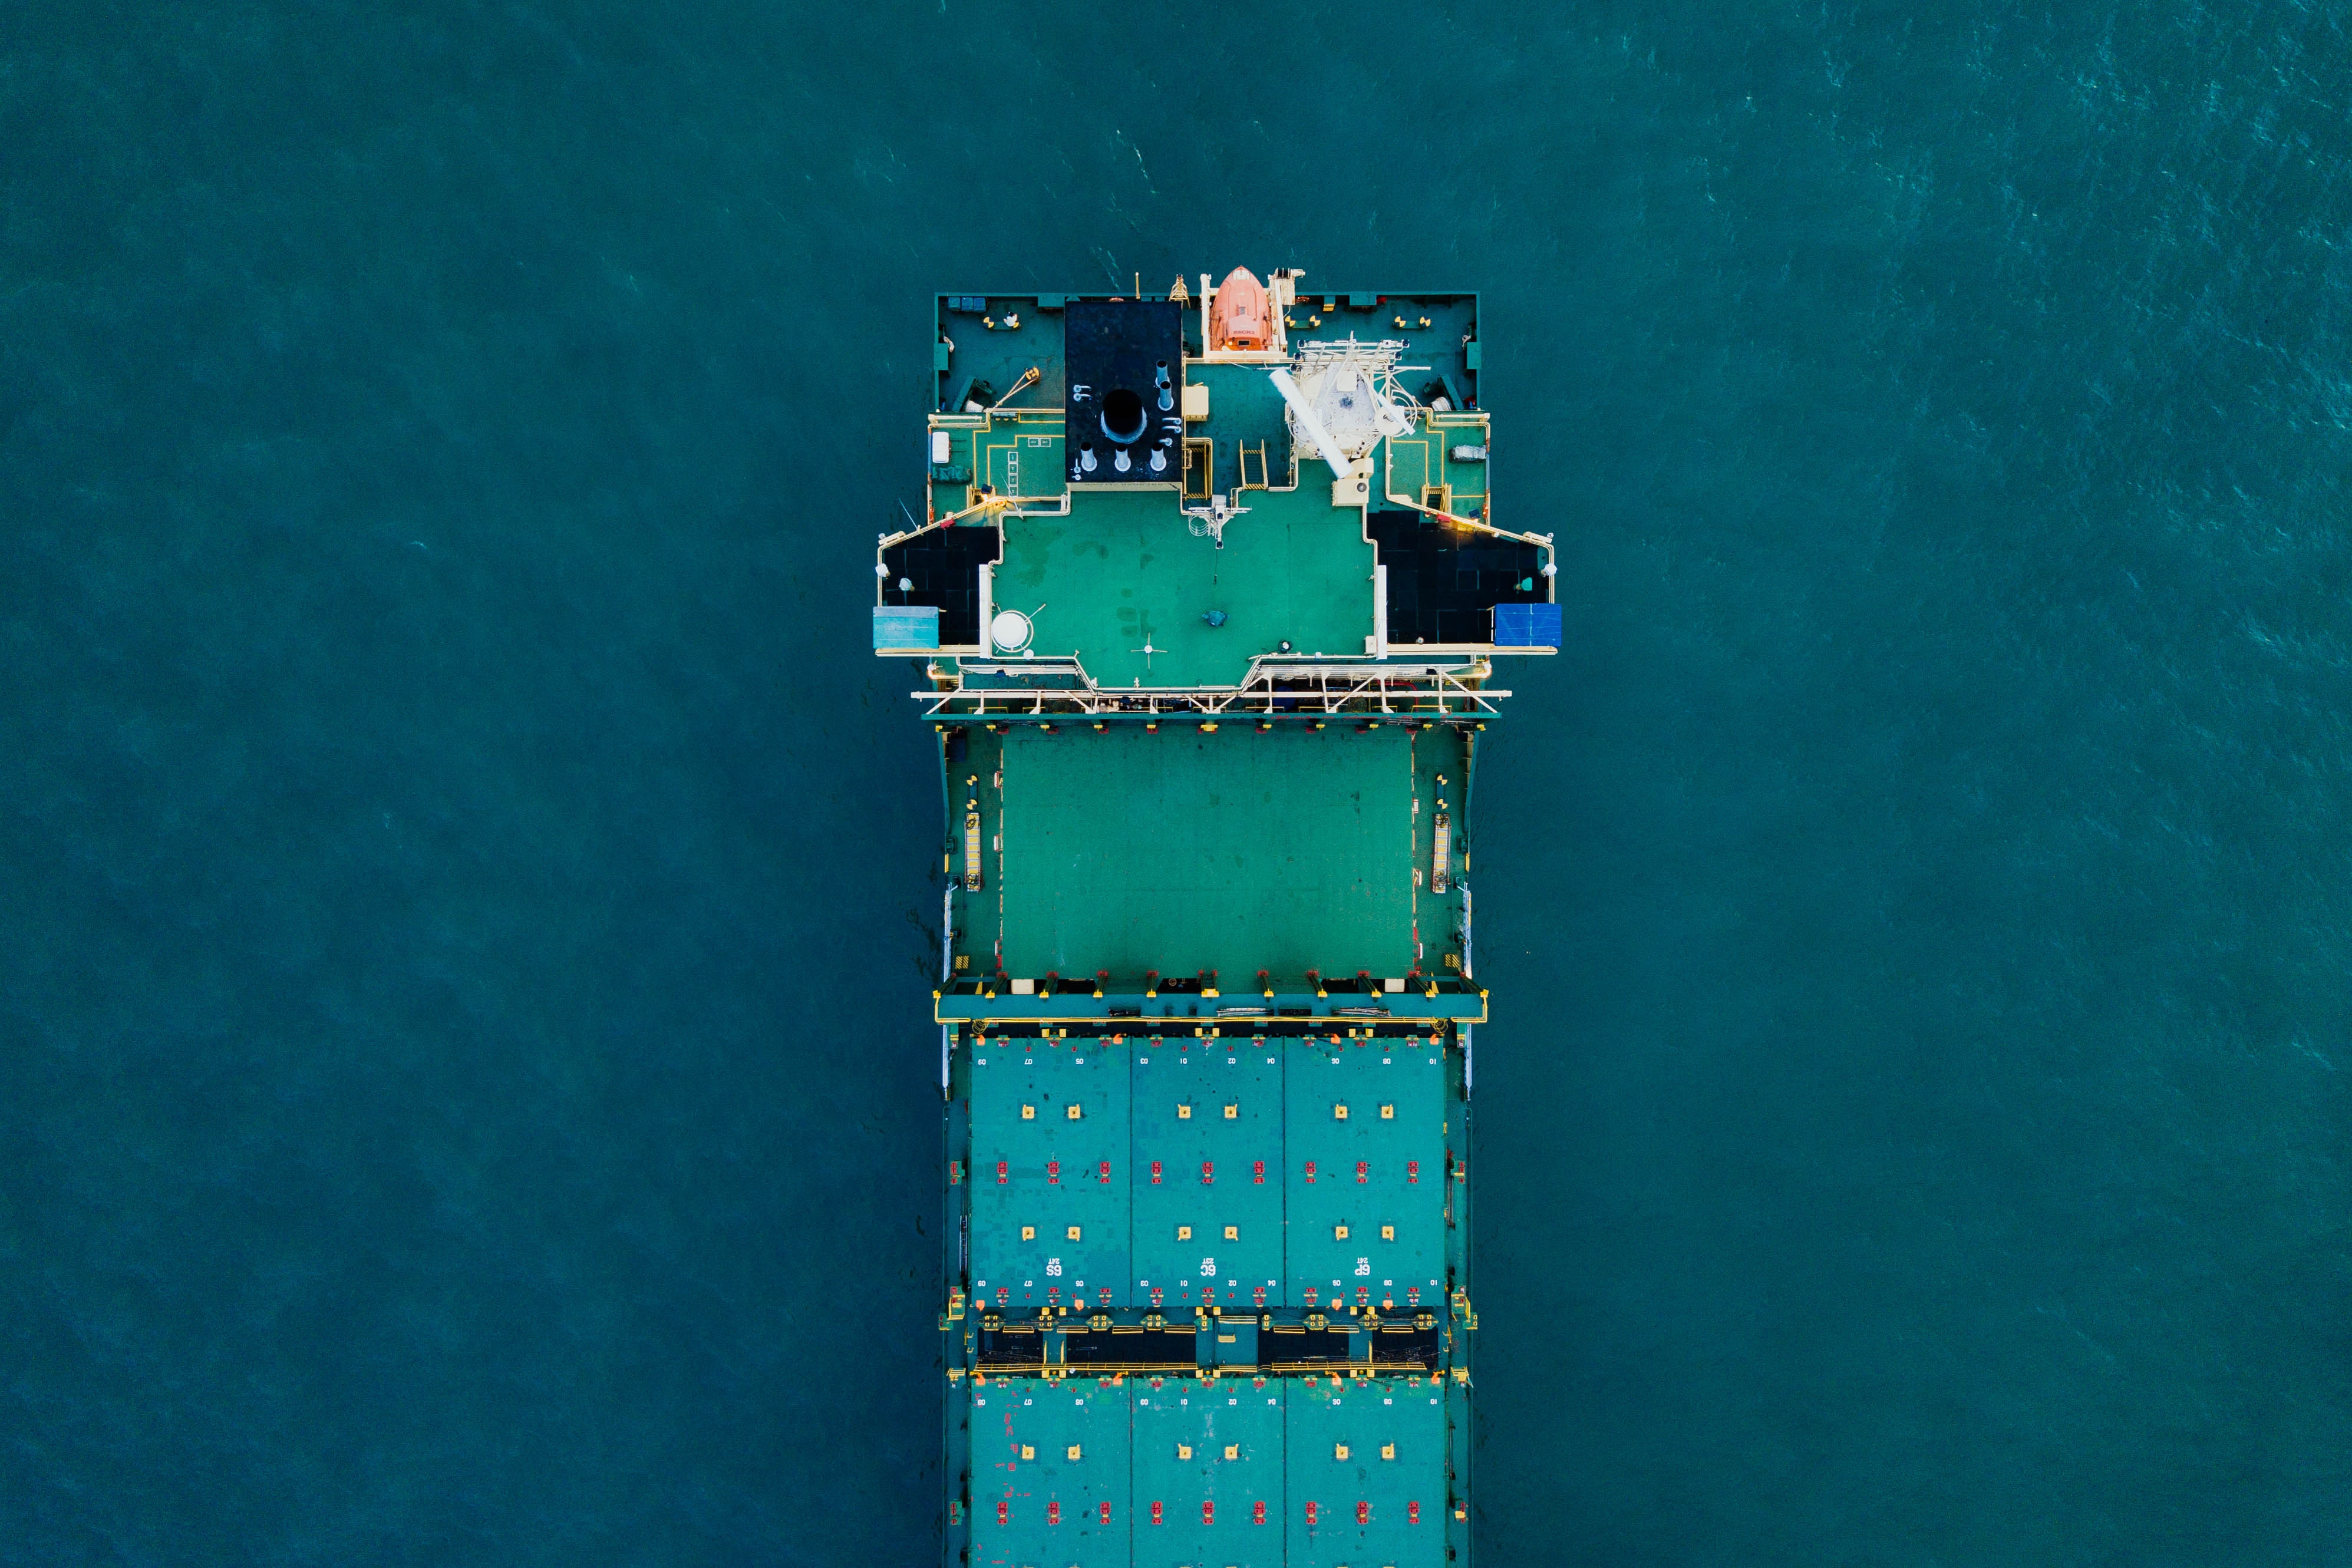 Cargo ship from overhead